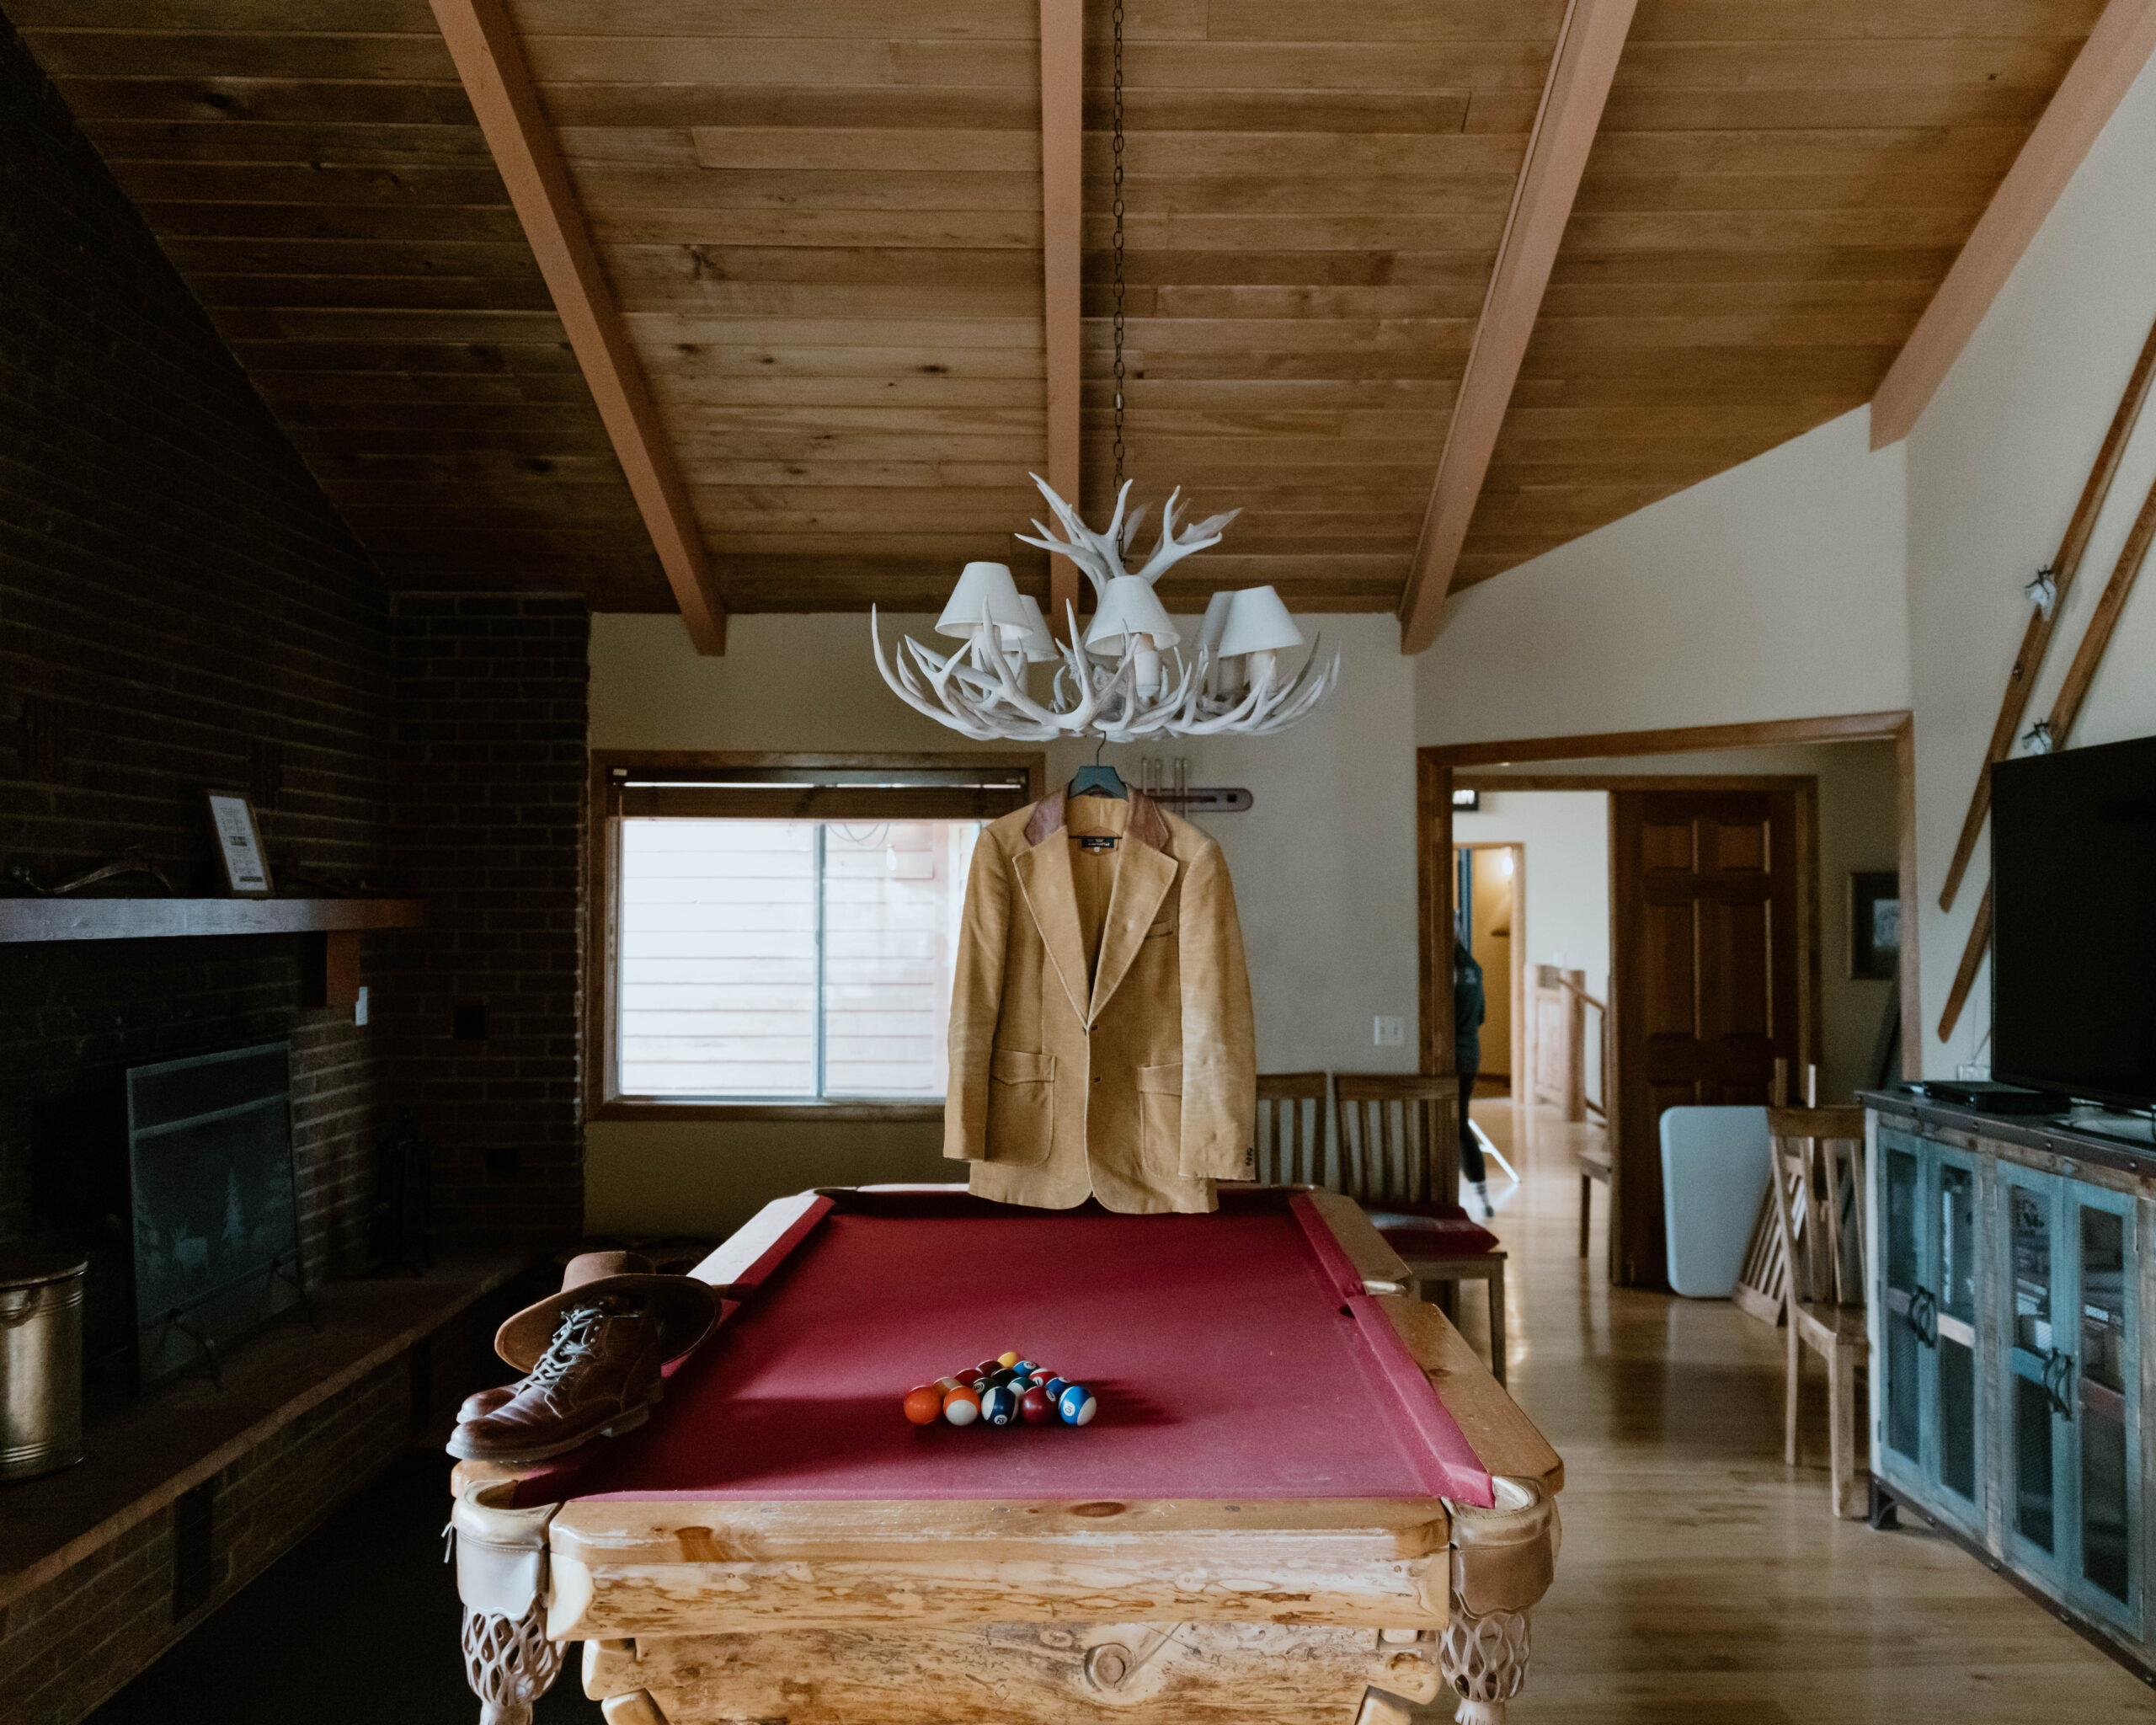 A pool table in a cabin is a resting spot for hiking boots and a hat, with an overhanging rustic chandelier